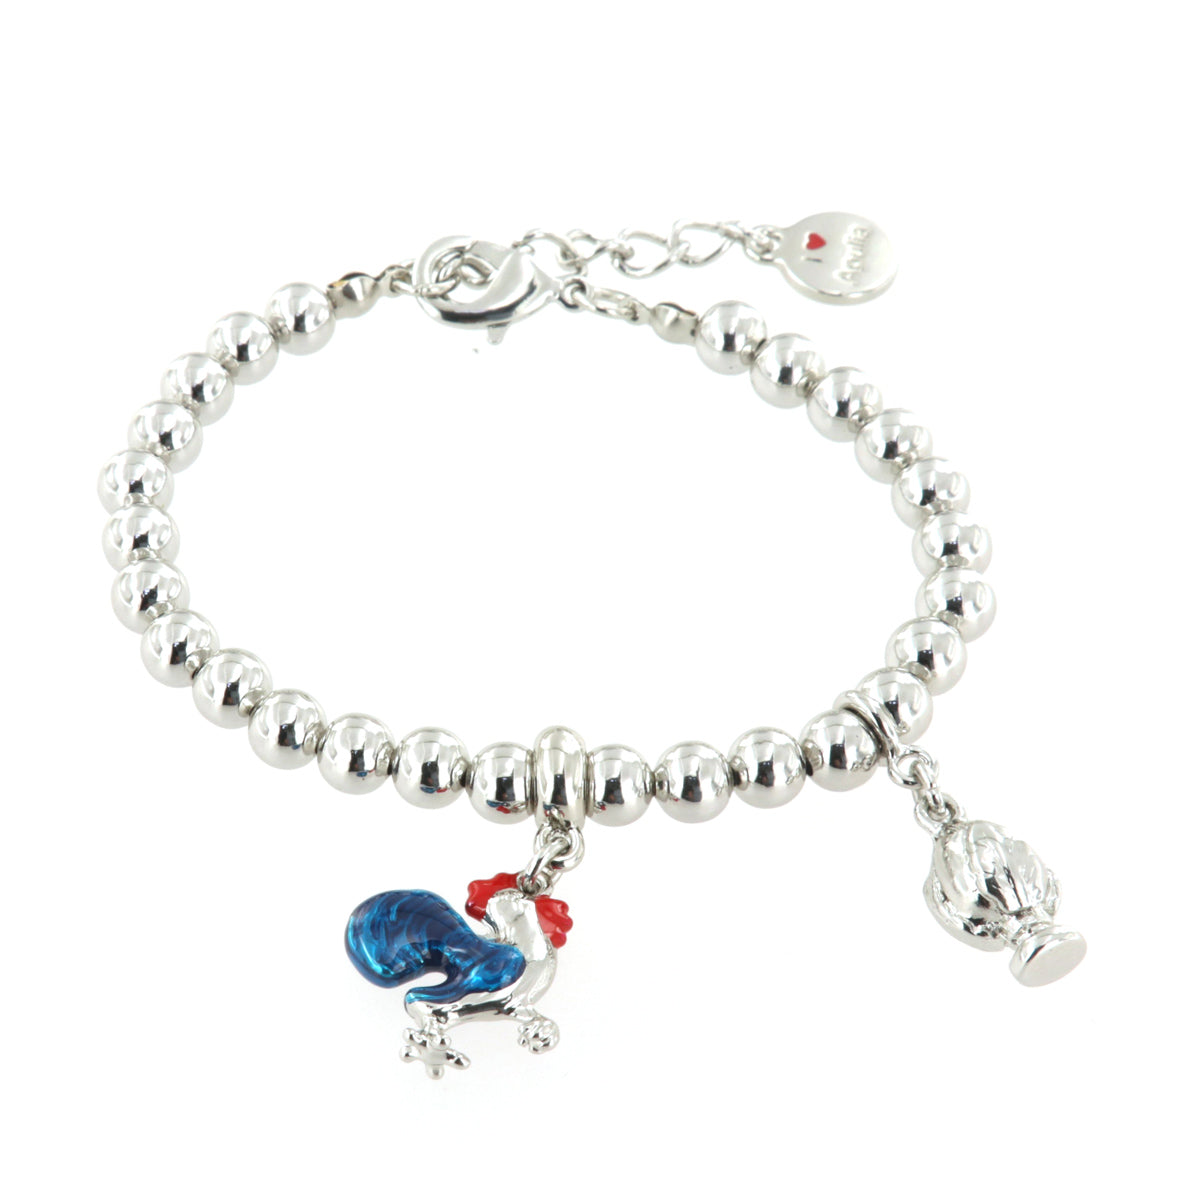 Metal bracelet with pendant rooster embellished with colored enamels and mini pendant pumo